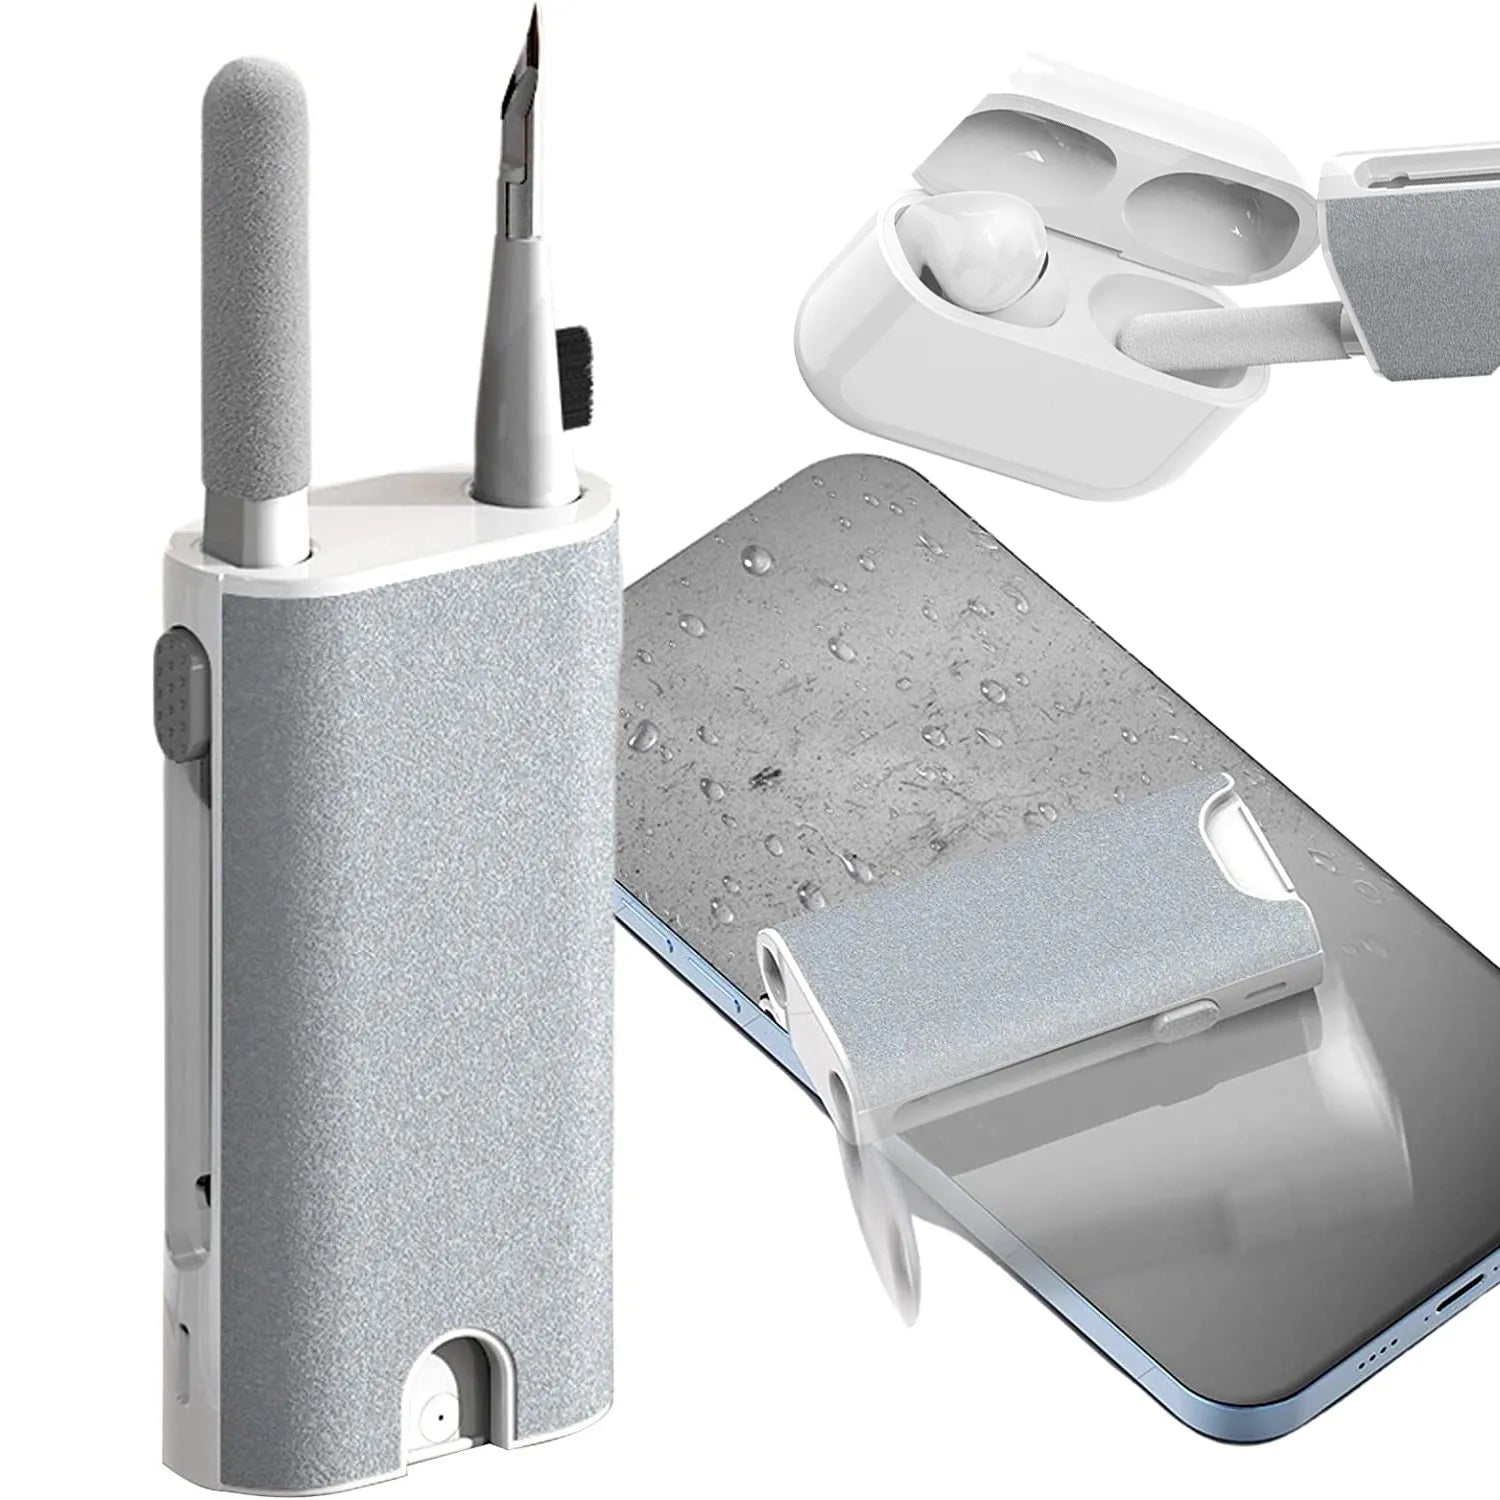 Cloud Discoveries 5-in-1 Device Cleaning Kit - Keep your gadgets spotless!